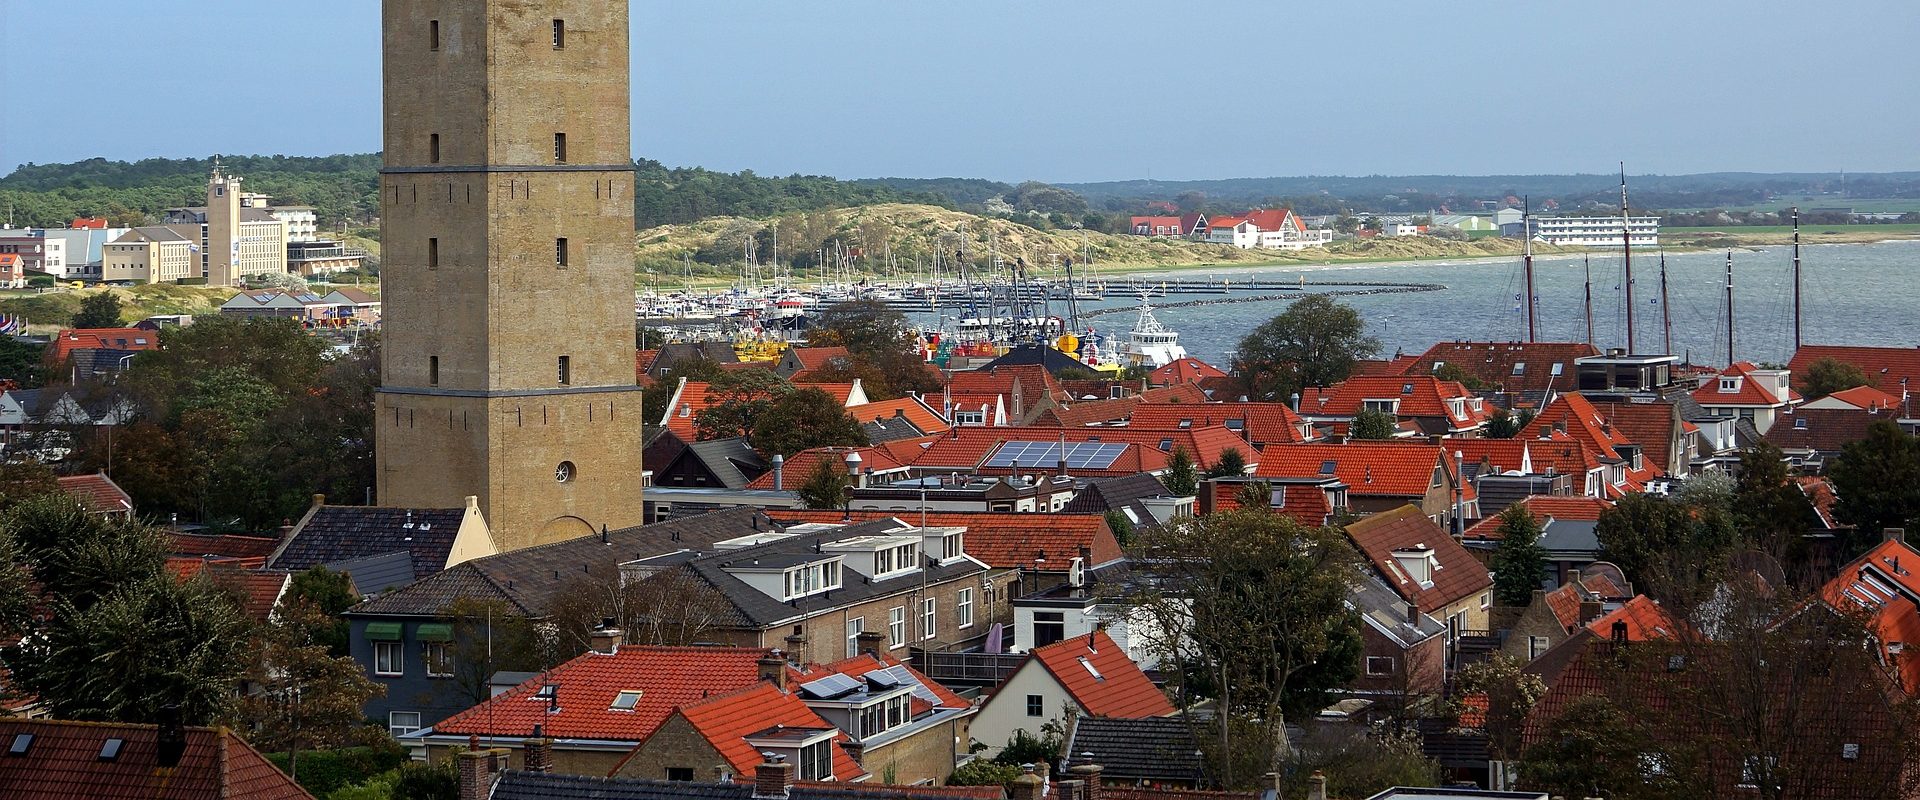 FNP brings Europe to Terschelling to discuss housing